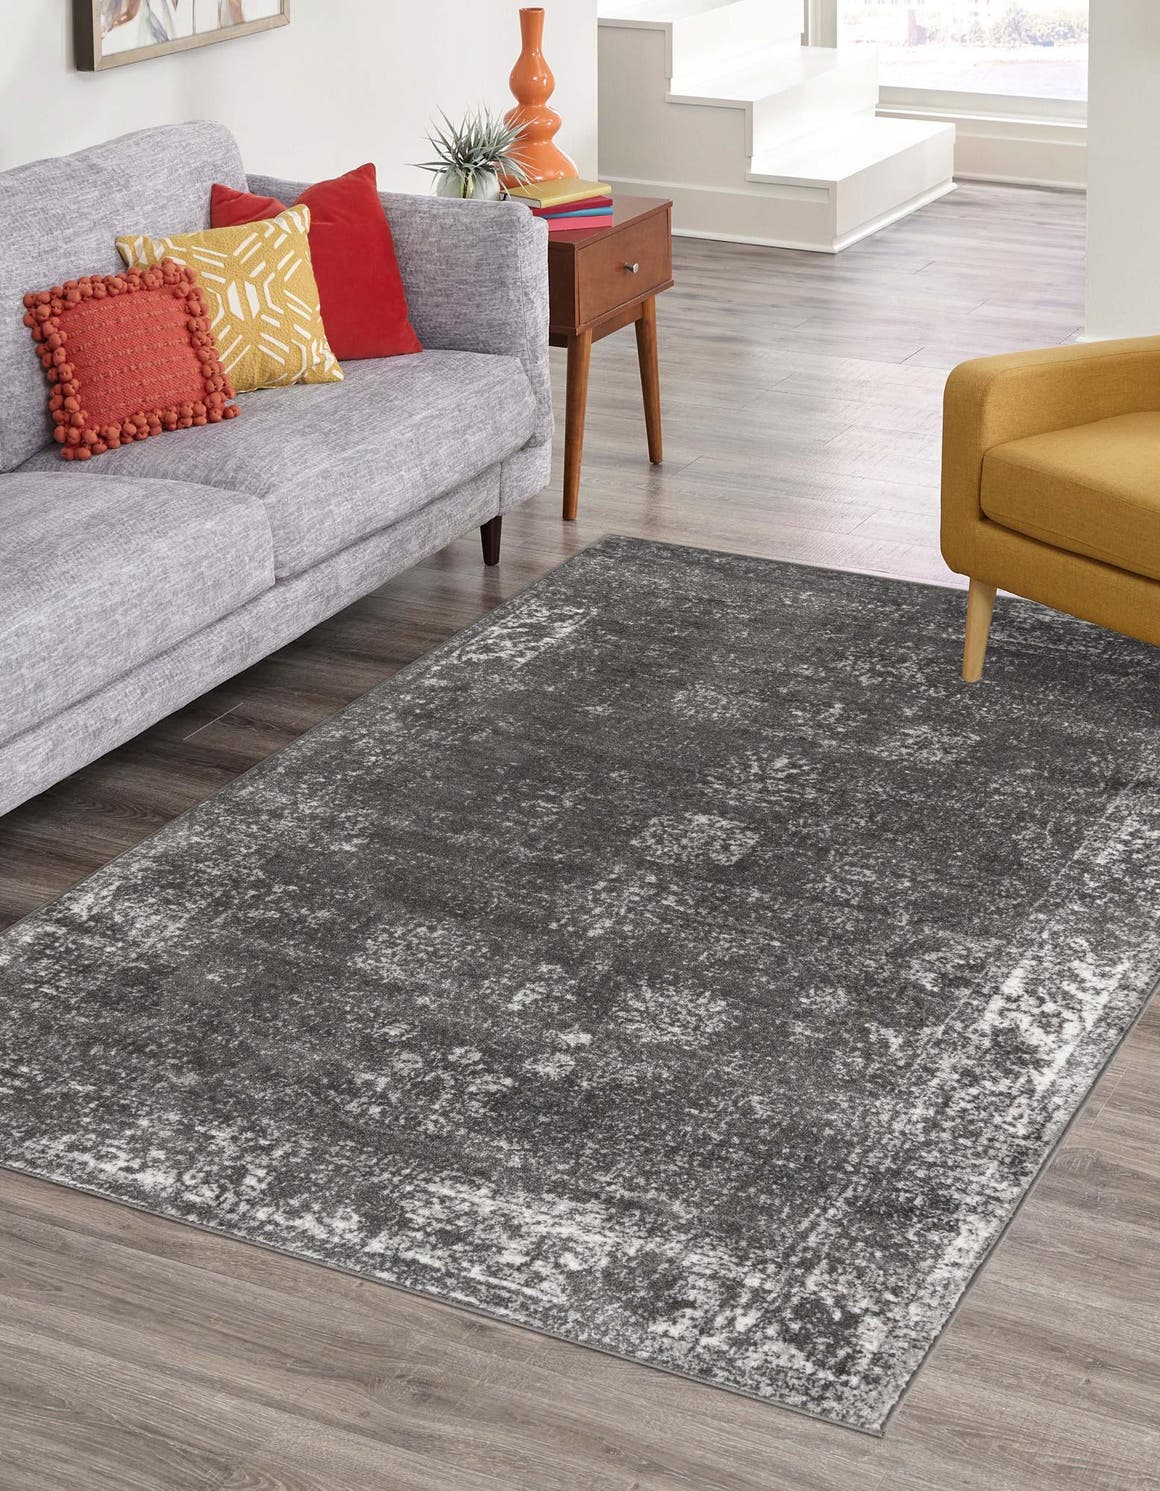 Unique Loom Casino Sofia Rug Dark Gray/Ivory 9' x 12' Rectangle Floral Bohemian Perfect For Living Room Bed Room Dining Room Office - image 1 of 8